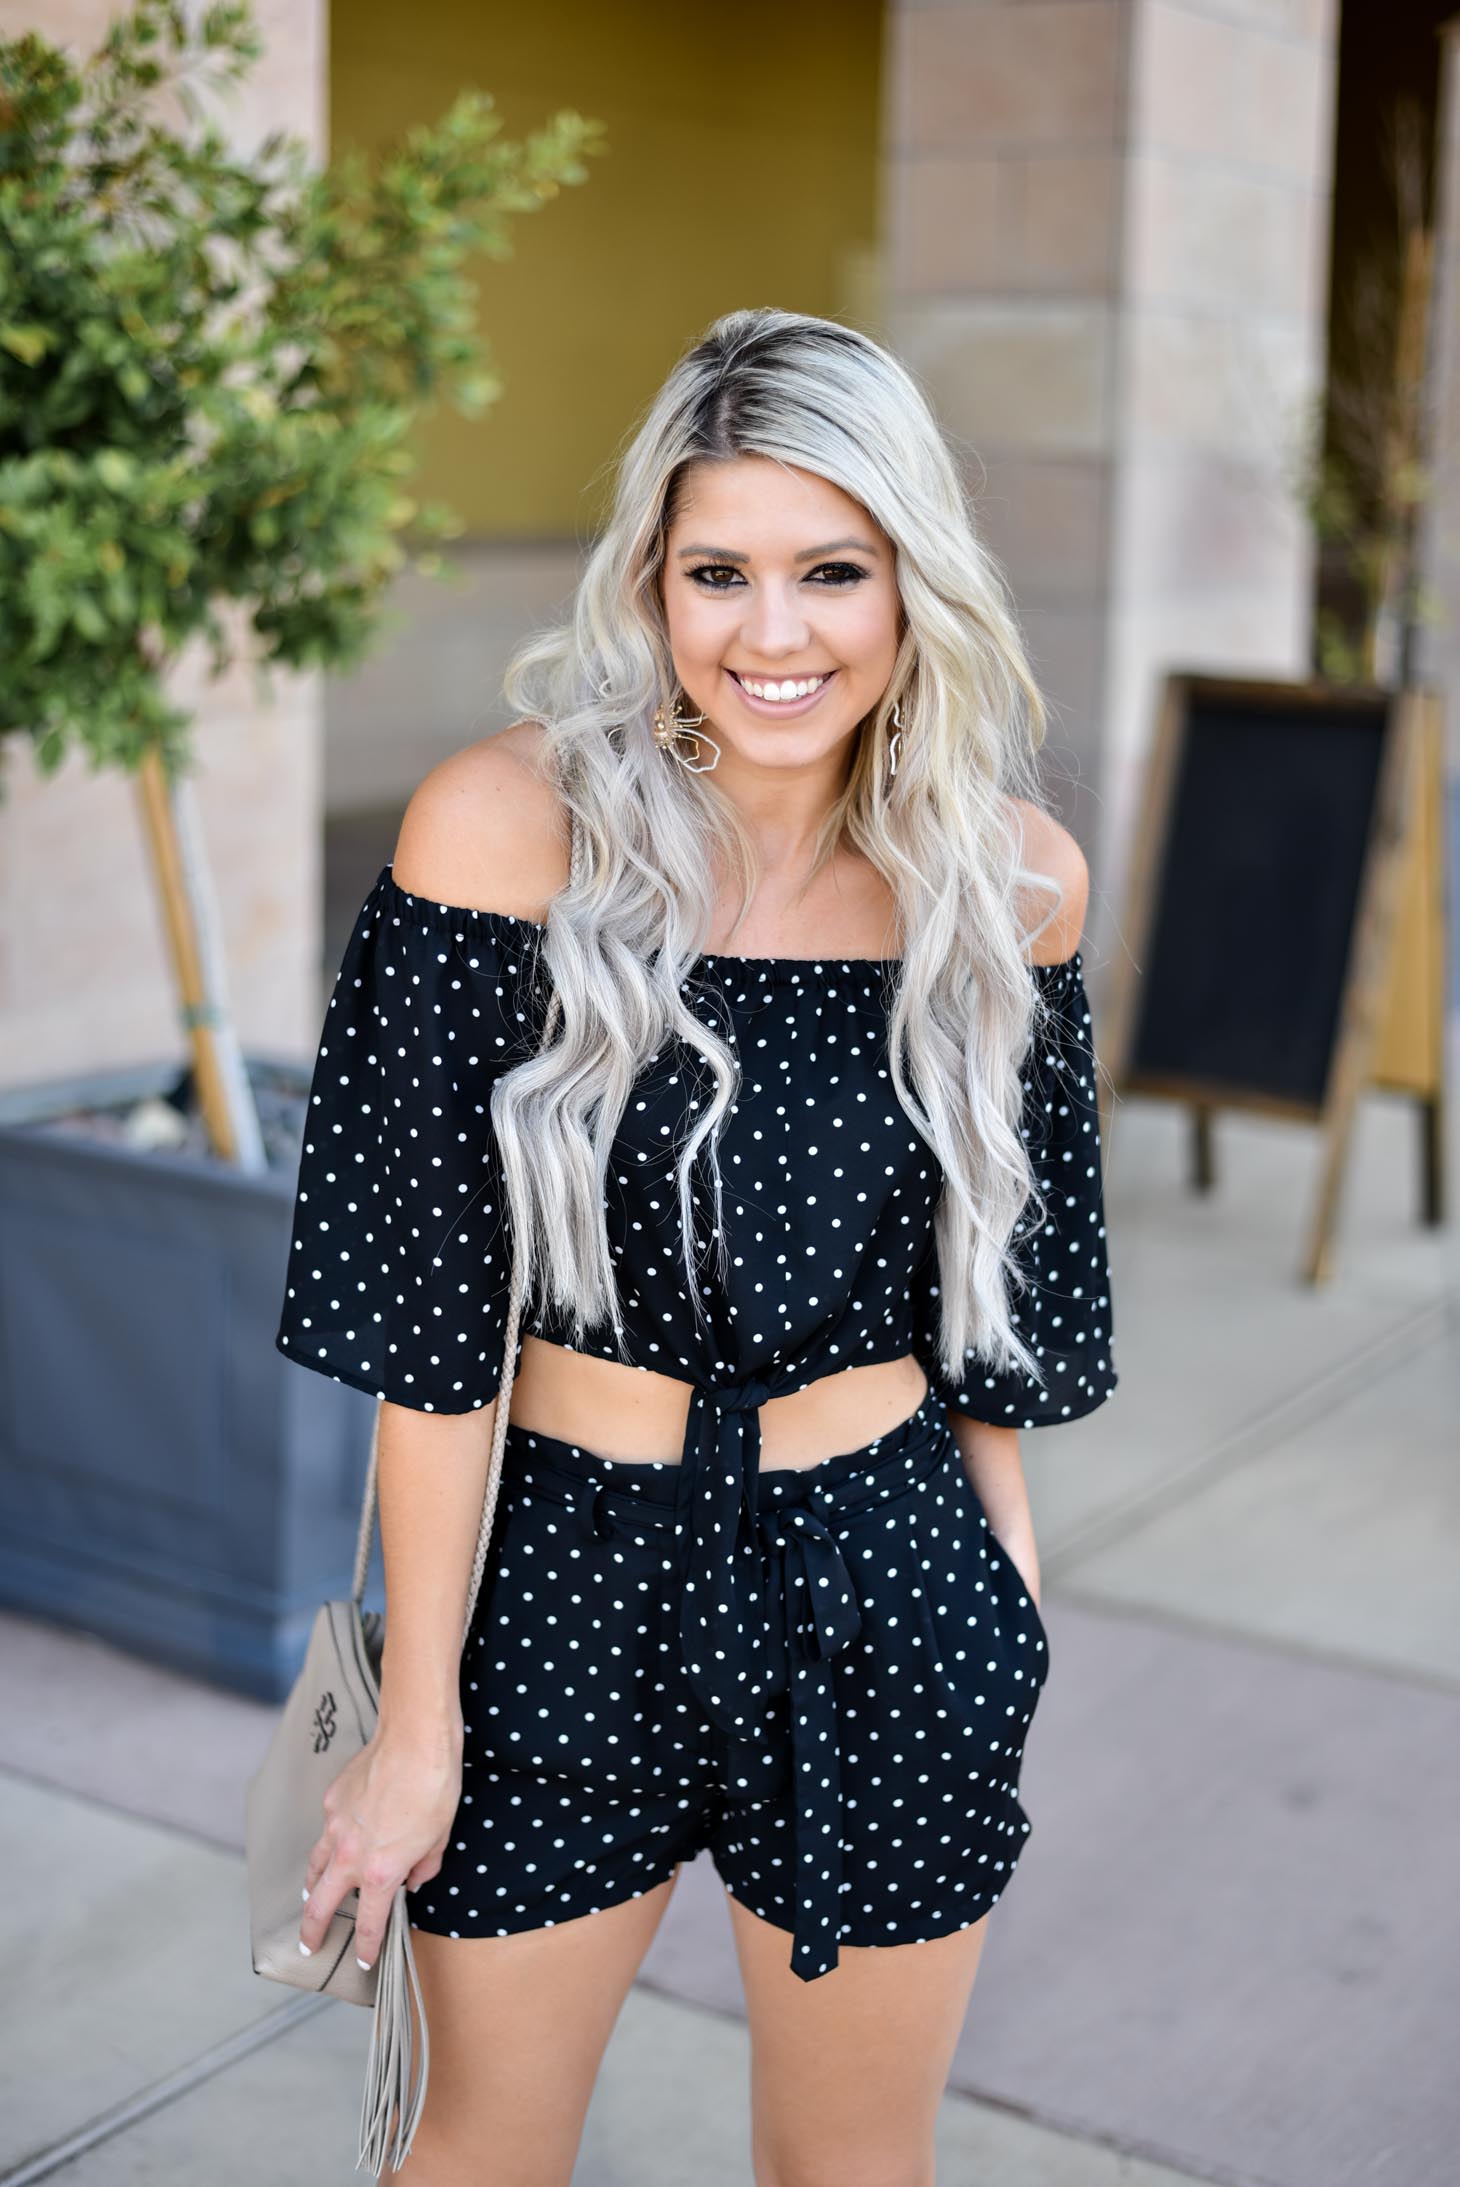 Erin Elizabeth of Wink and a Twirl shares the cutest polka dot two piece set from Shop Priceless